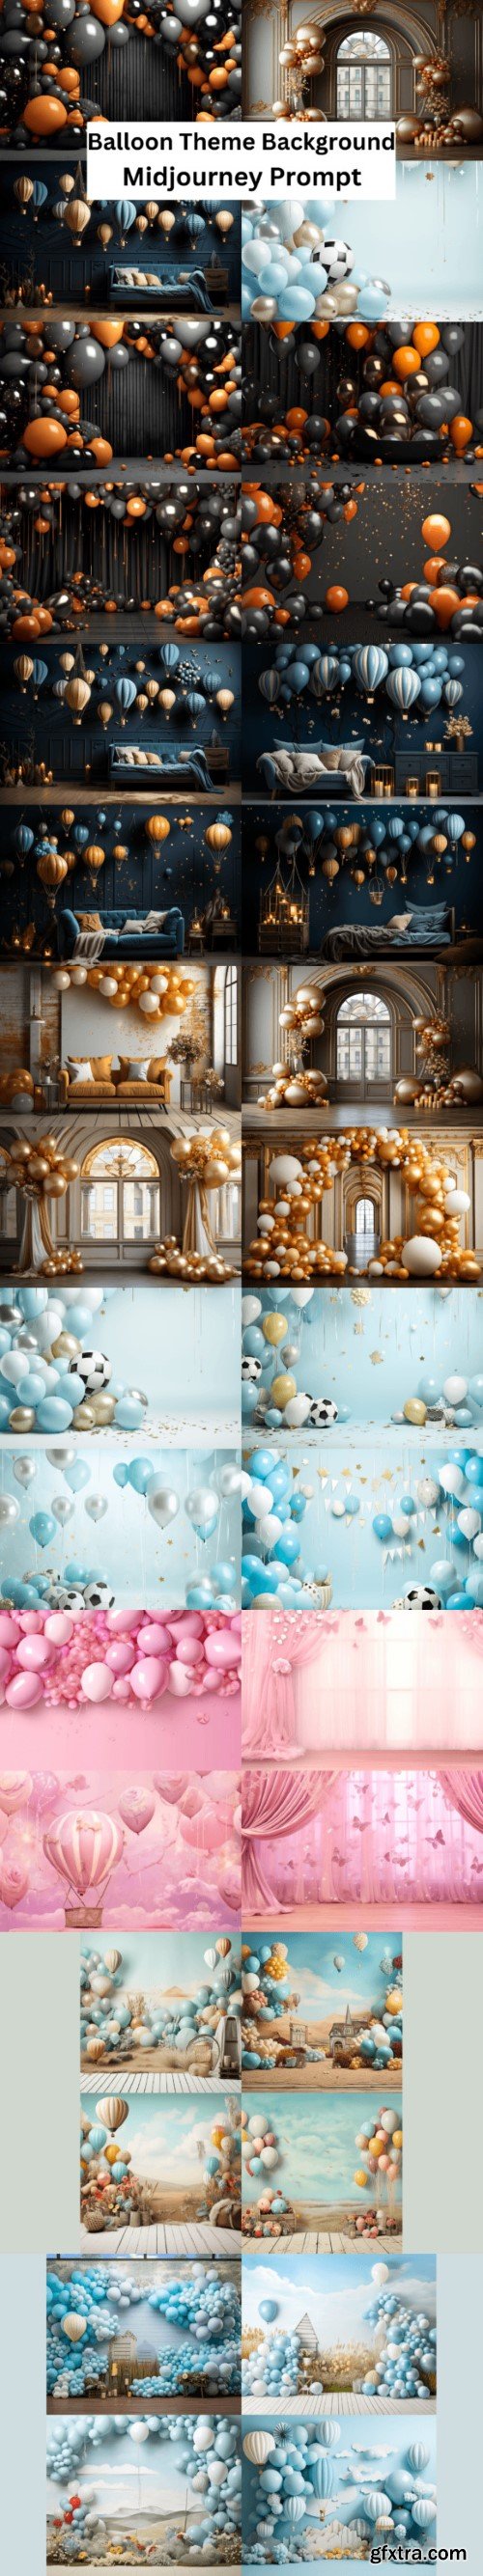 Prompt for Balloon Theme Background